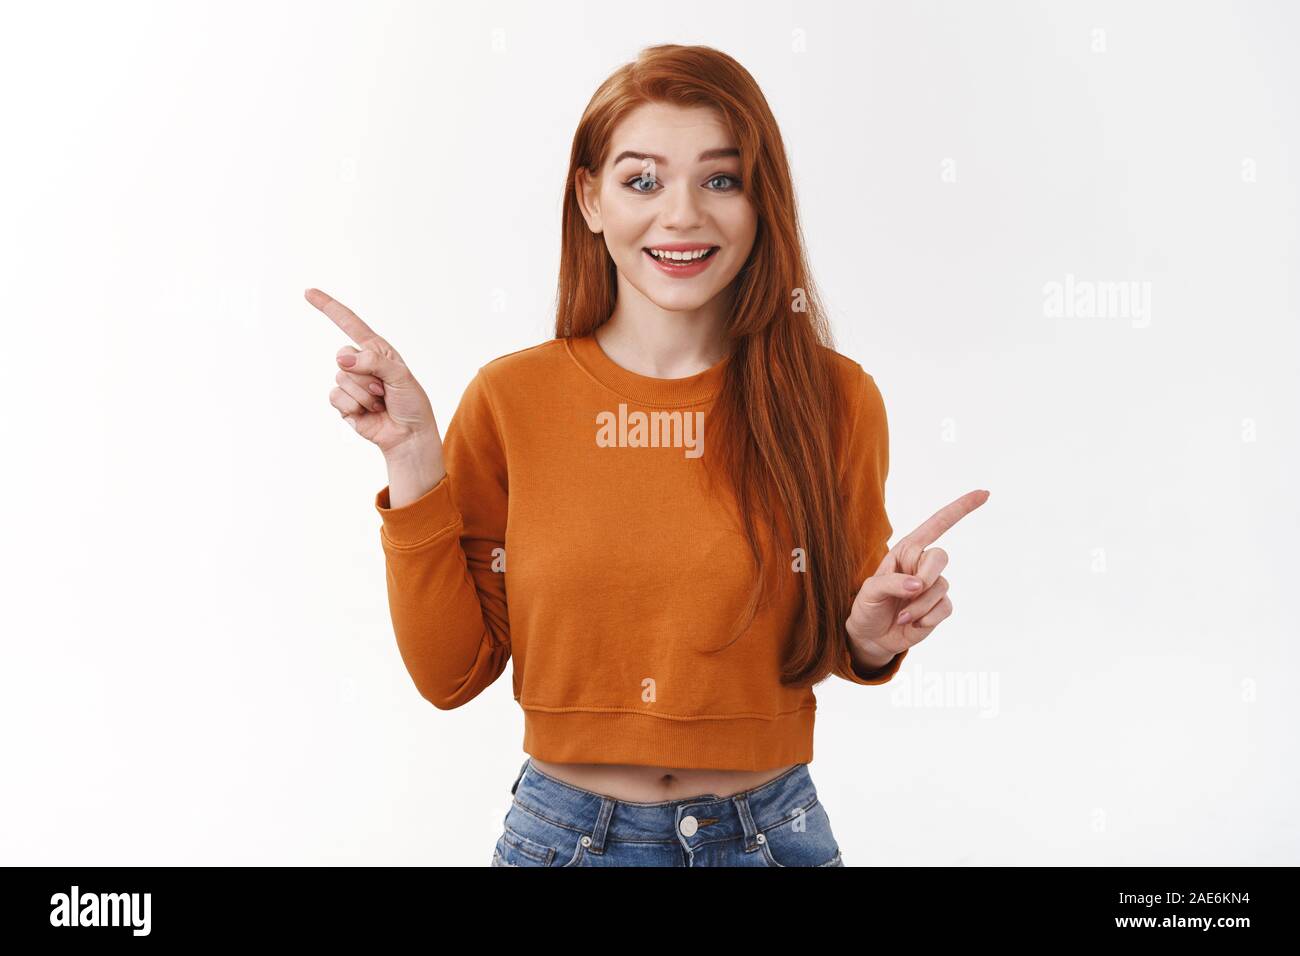 Cheerful smiling happy redhead girl asking advice what better choose, pointing sideways indicating left and right varitants, decide or give suggestion Stock Photo